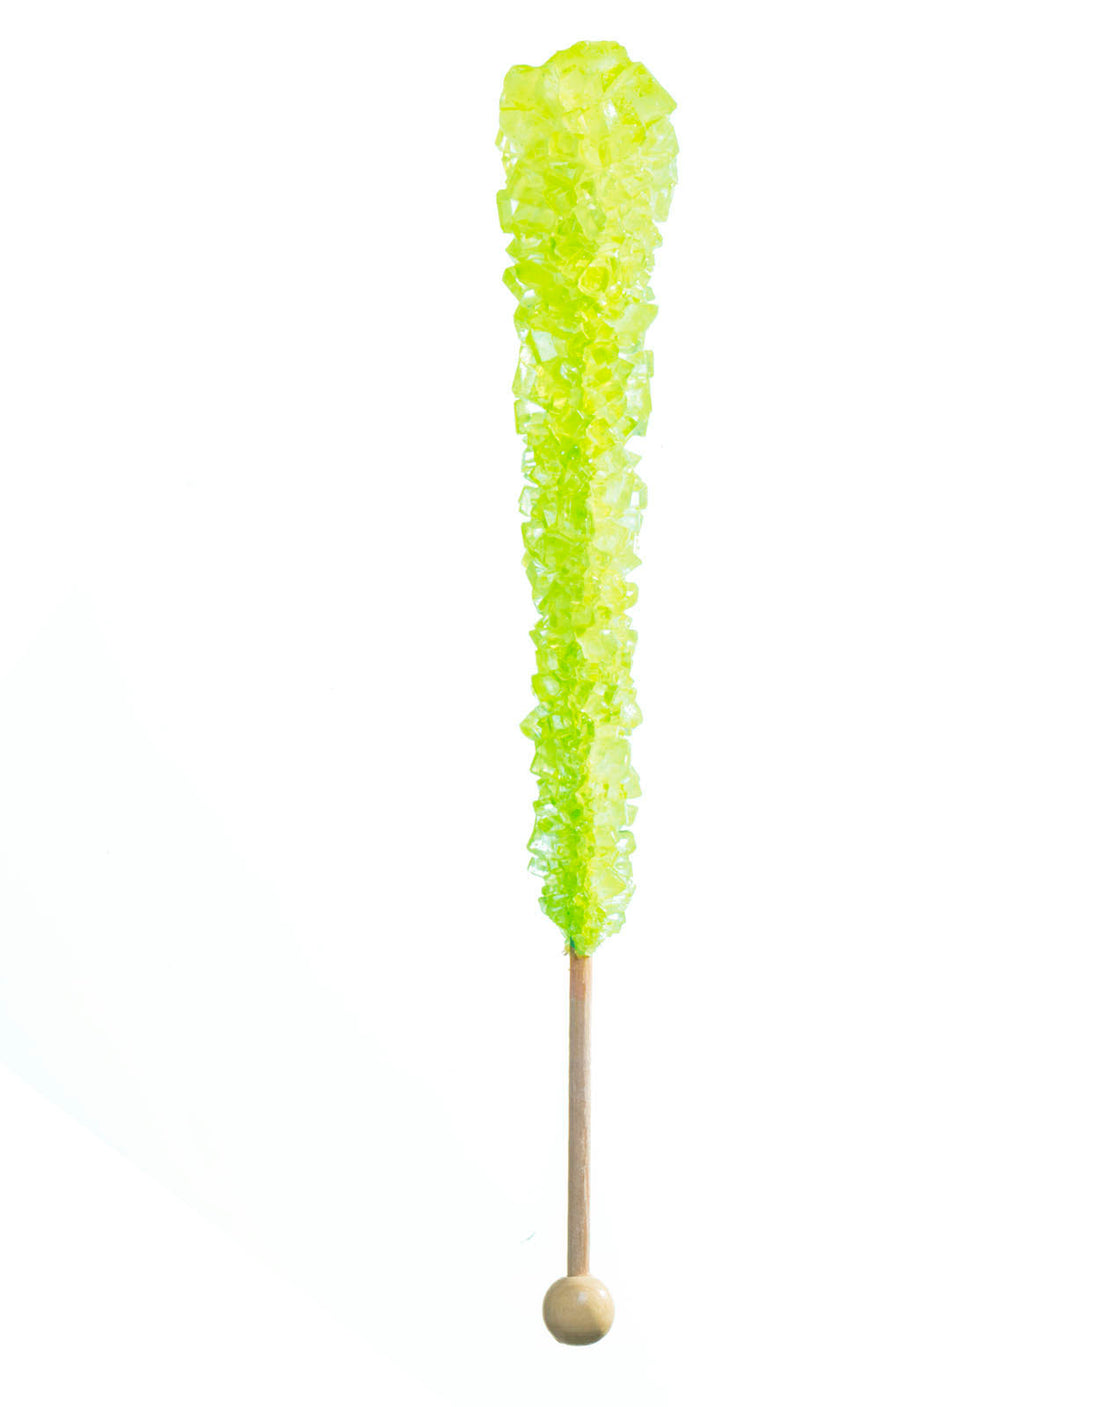 Assorted Colors Rock Candy Crystal Sticks - Assorted Flavors